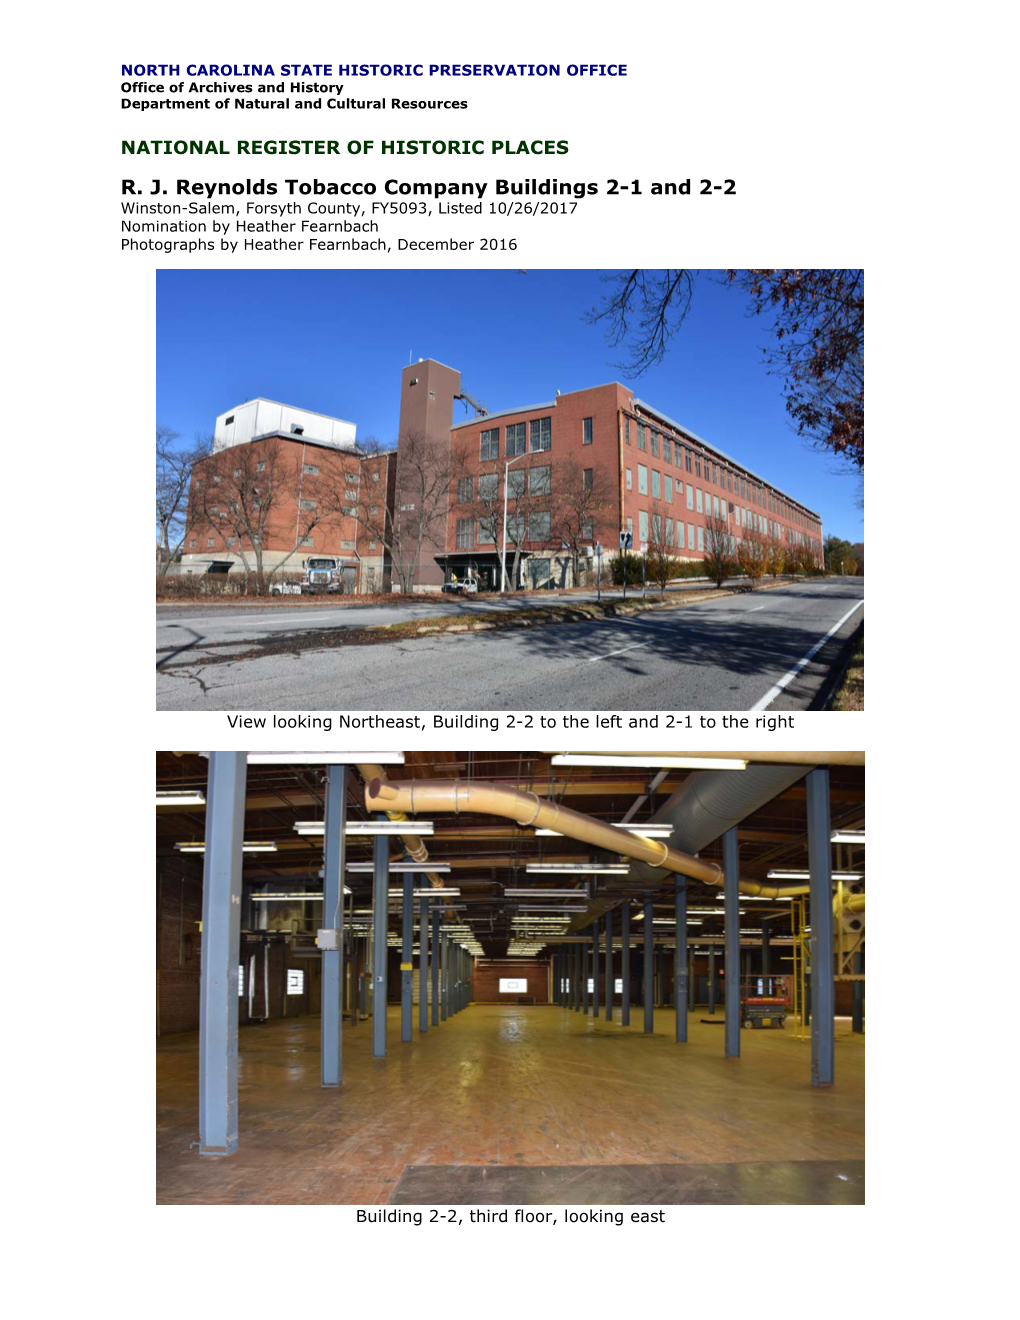 R. J. Reynolds Tobacco Company Buildings 2-1 And